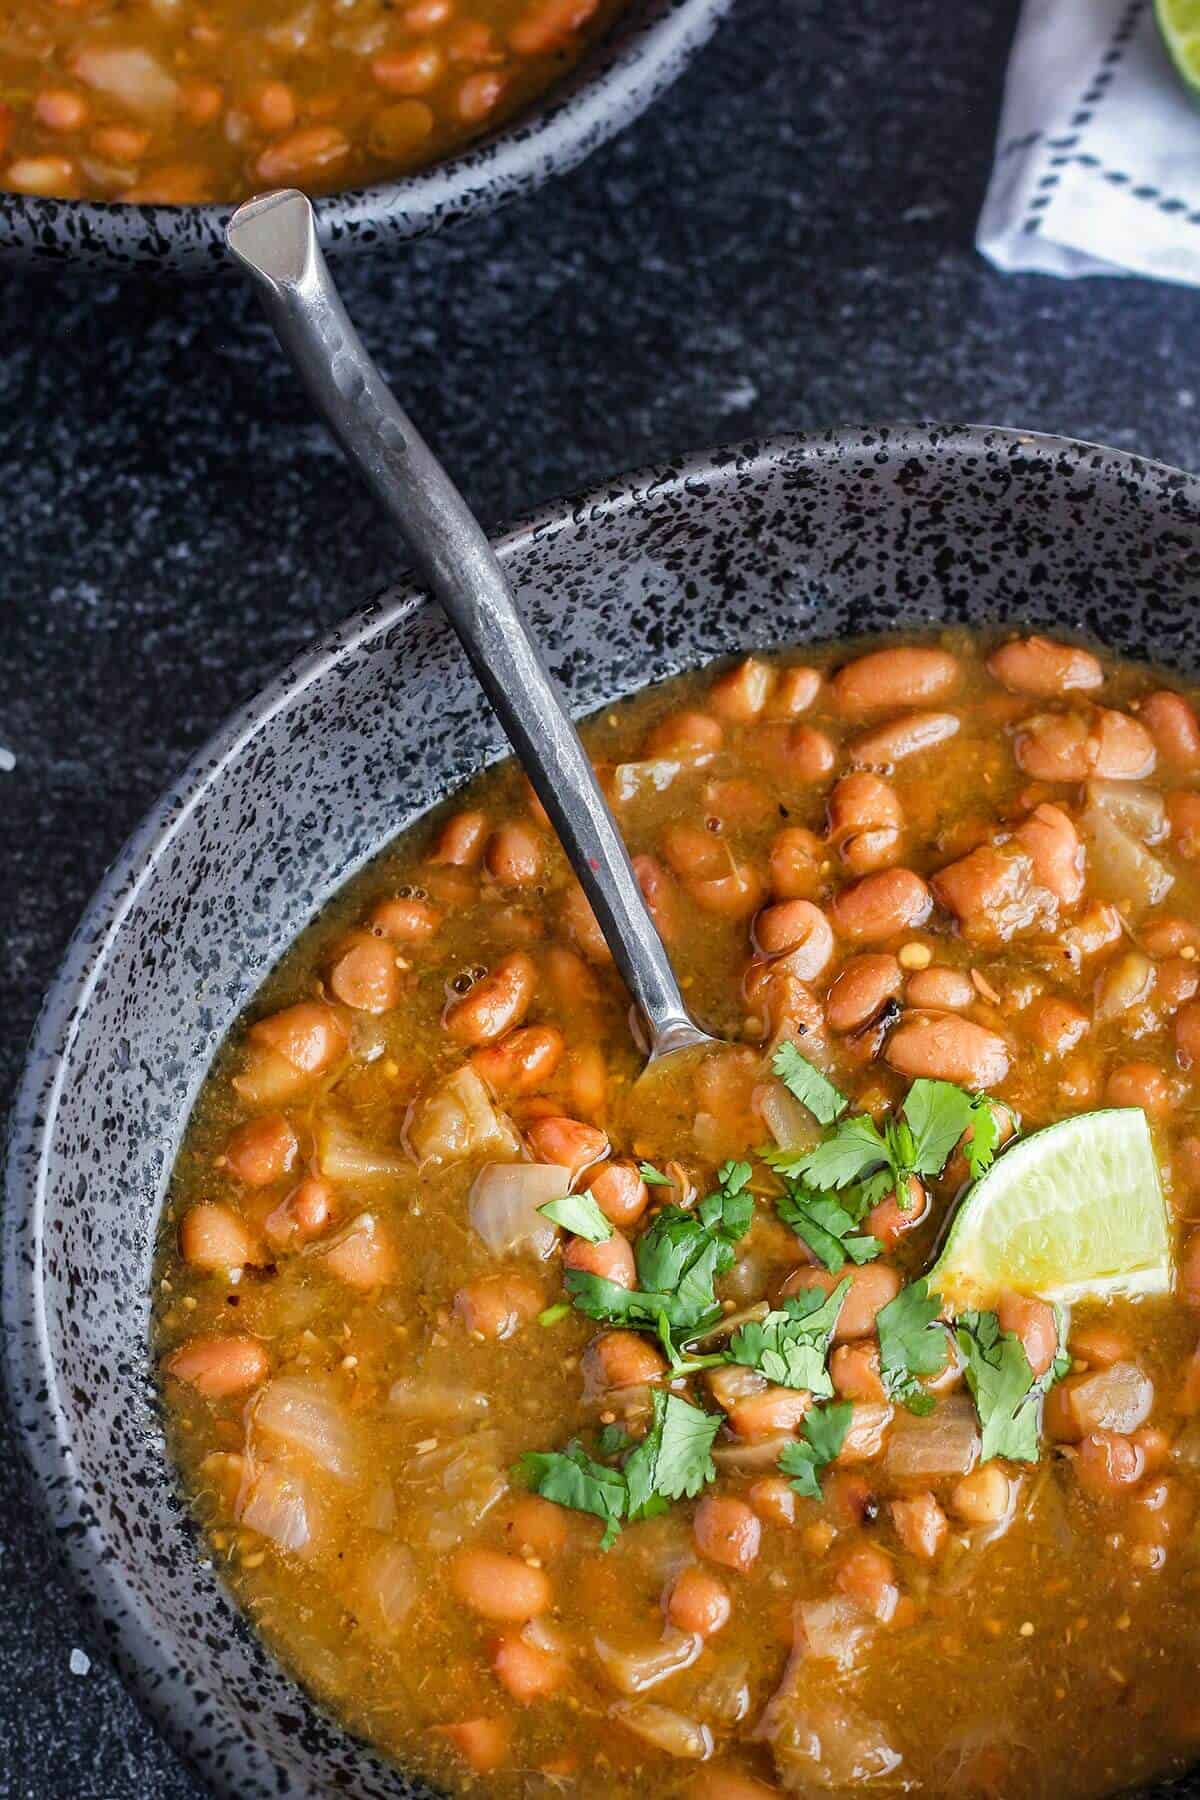 Bowl of pinto beans with a spoon.